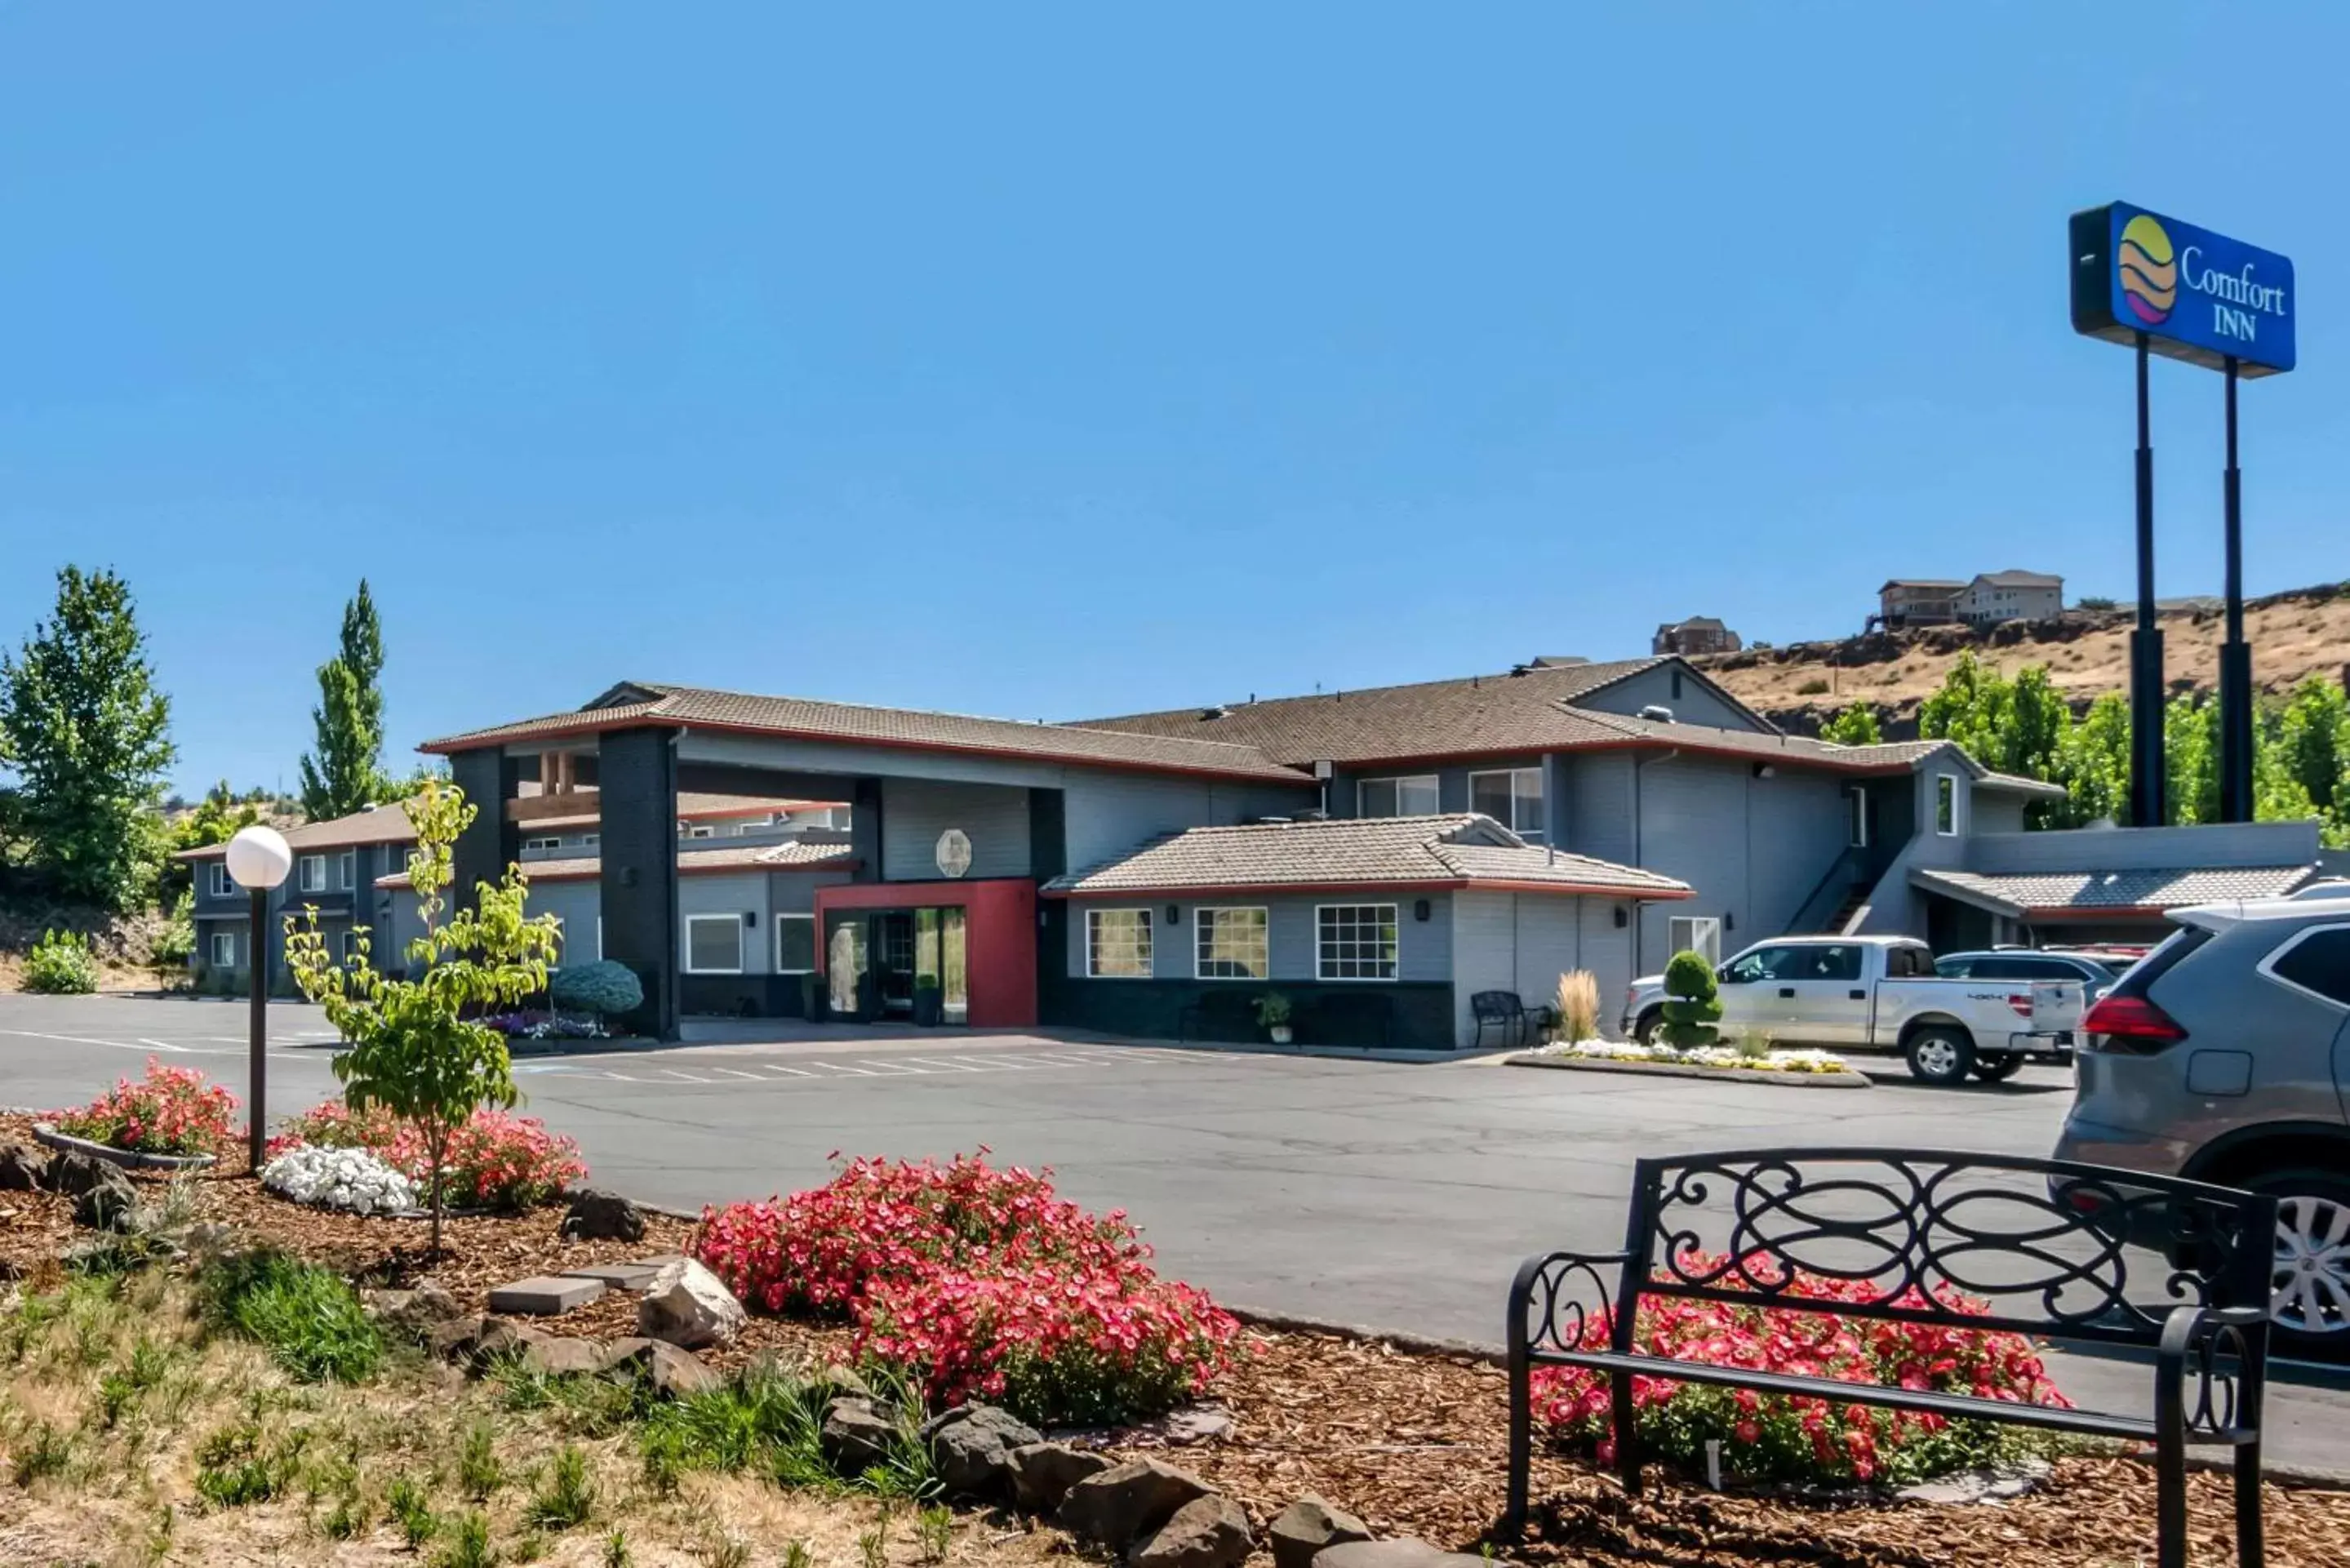 Property building in Comfort Inn Columbia Gorge